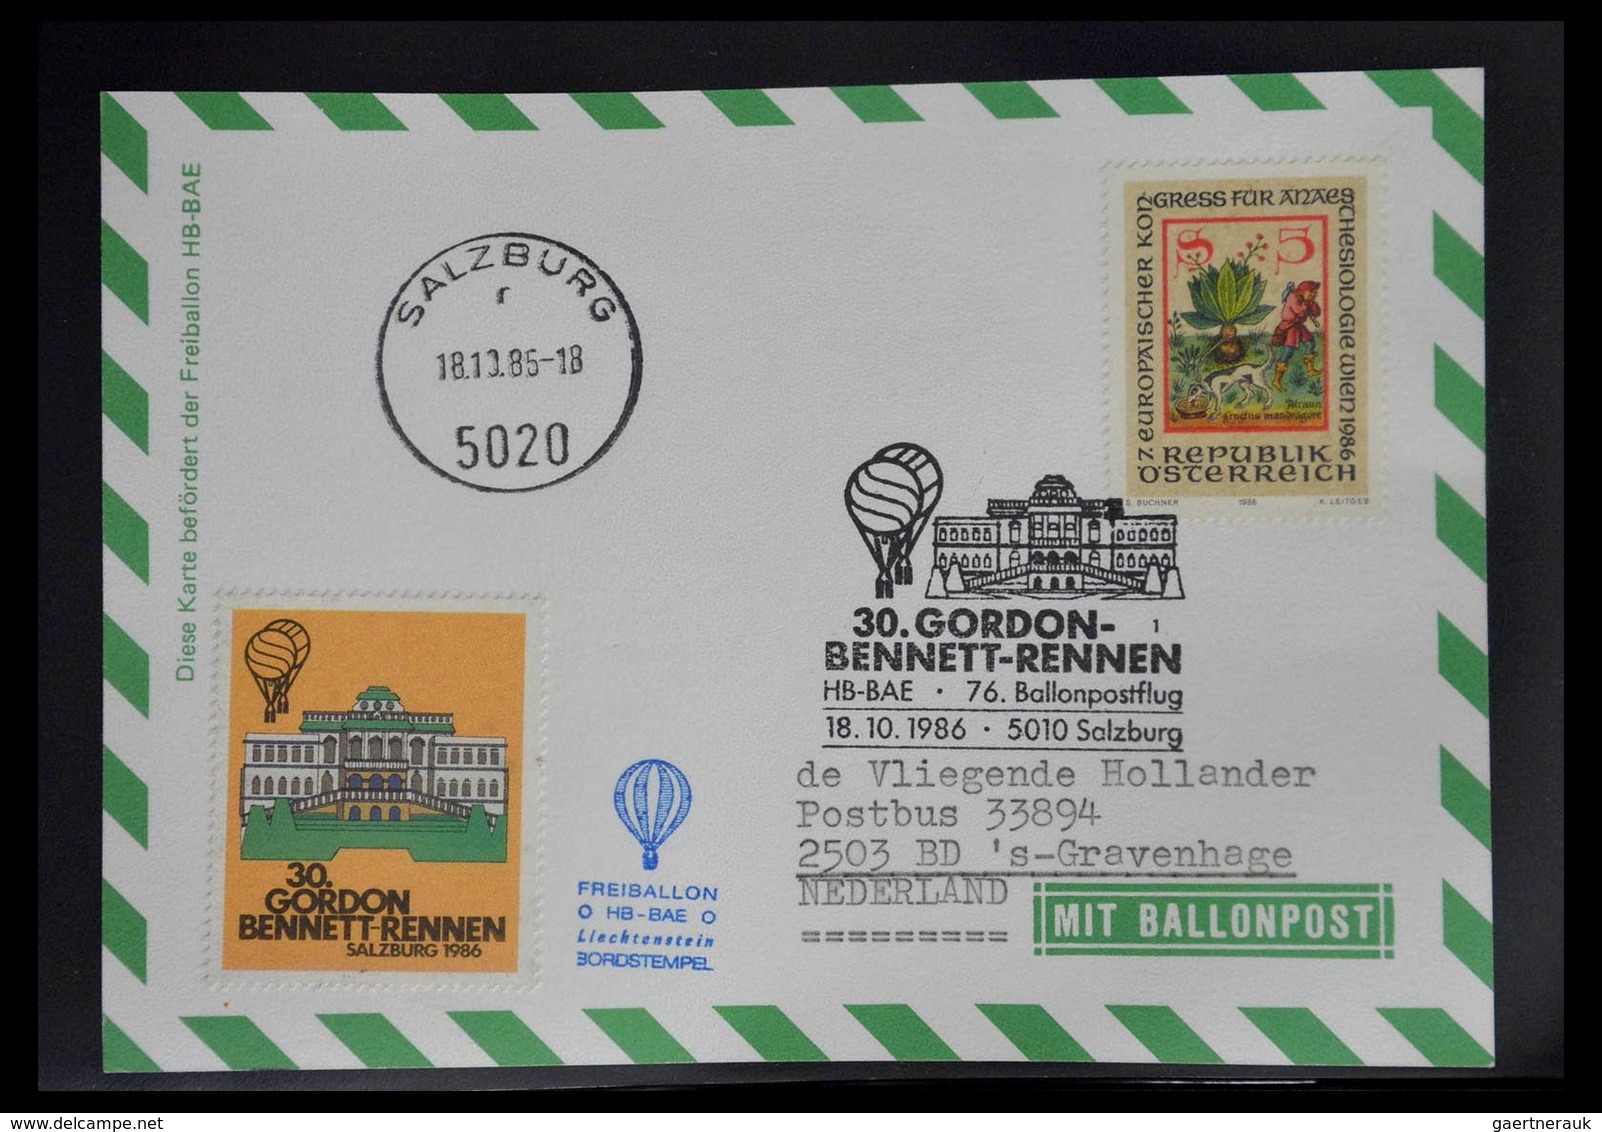 Ballonpost: 1927-2001: Nice collection of over 650 balloonpost covers of a.o. Netherlands, USA, Grea